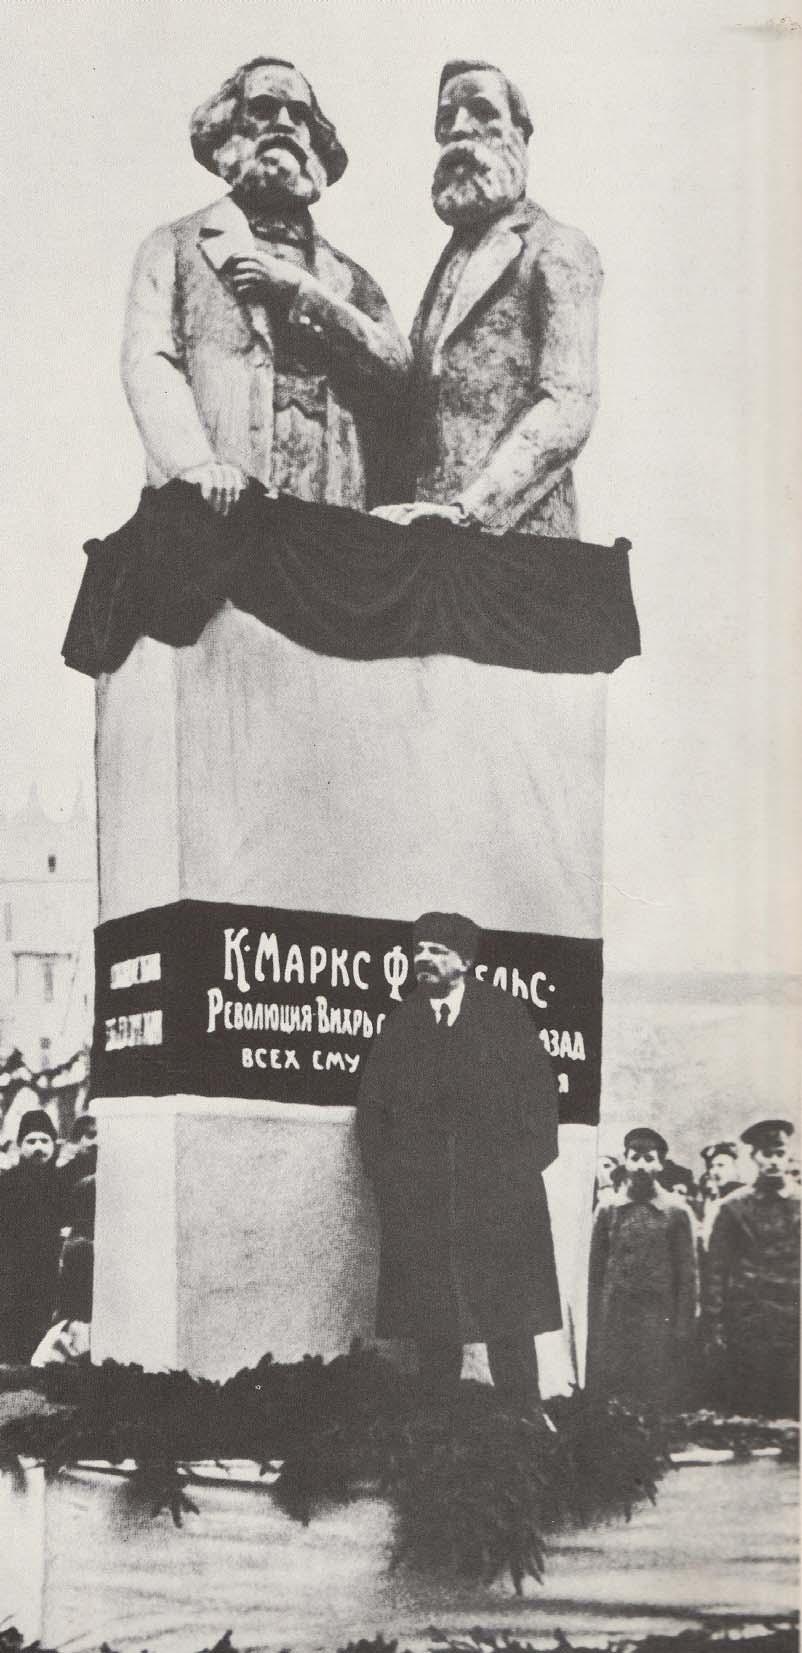 by Victoria dela Gente Lenin making a speech at the unveiling of the memorial to Karl Marx and Friedrich Engels in Moscow November 7, 1918 This year marks the 100th anniversary of the October